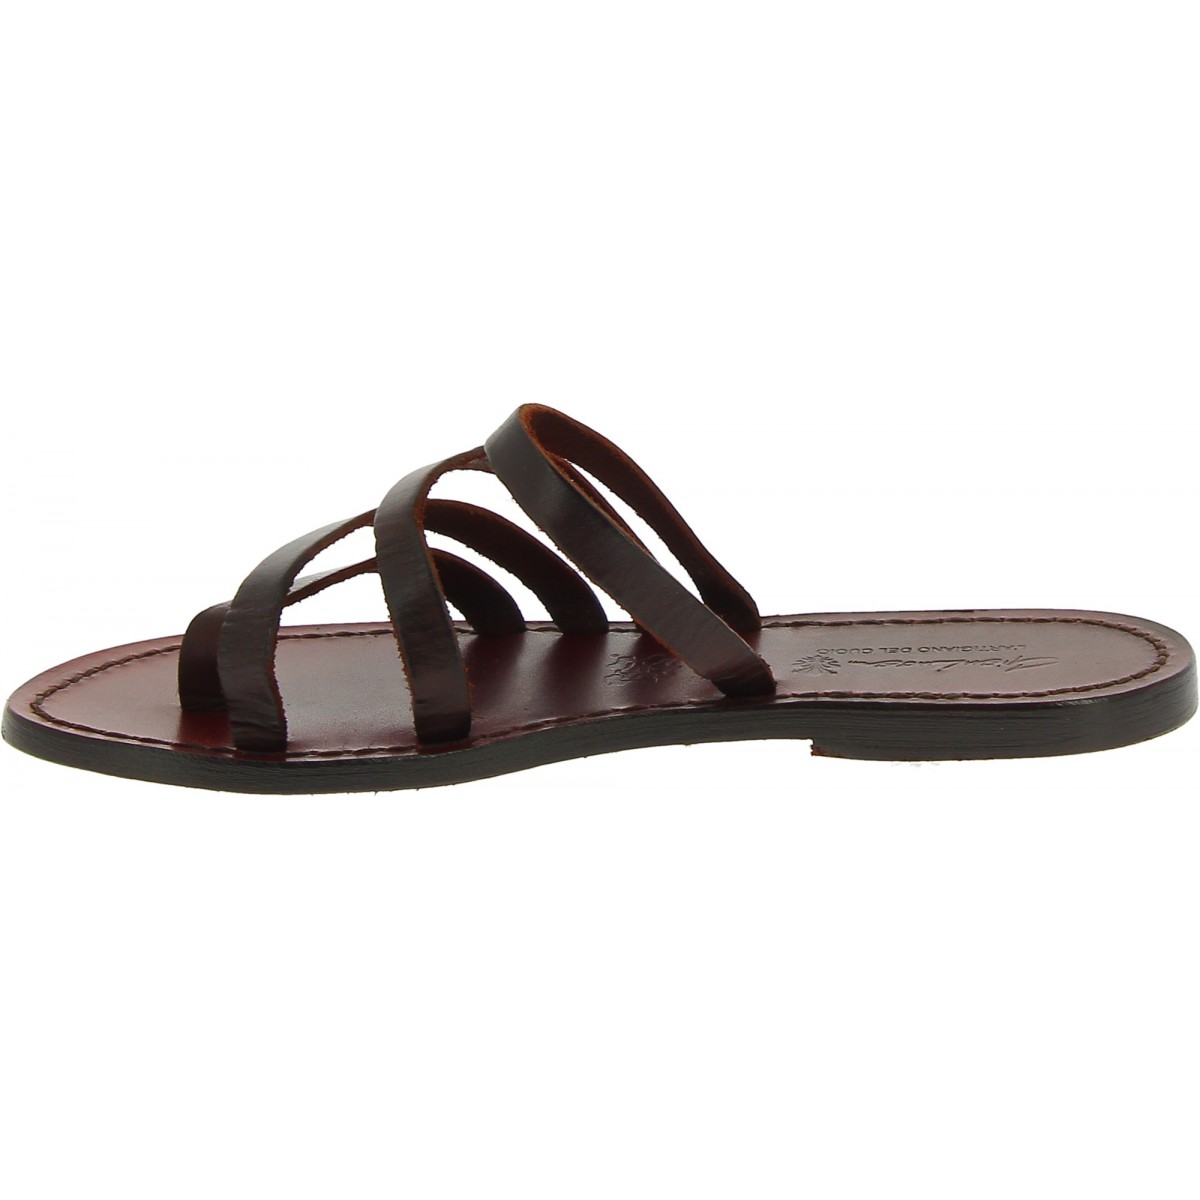 Handmade brown leather flip flop sandals for women | The leather craftsmen